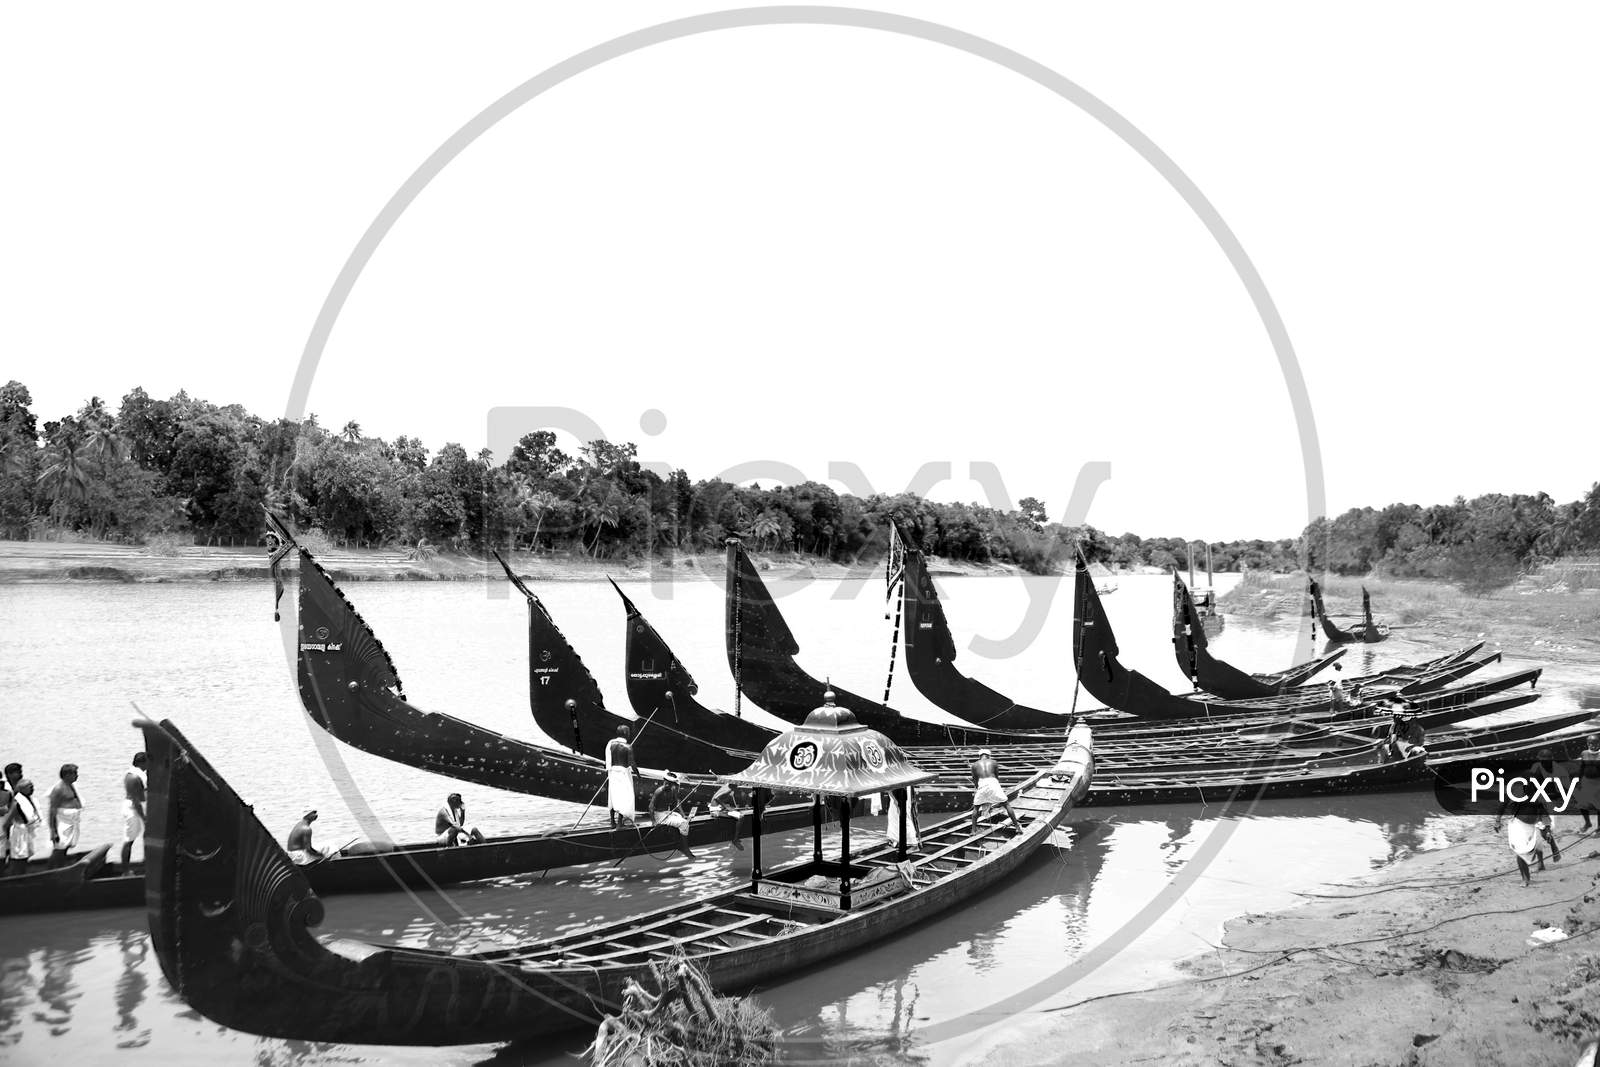 Monochrome shot of Boats parked in a Lake